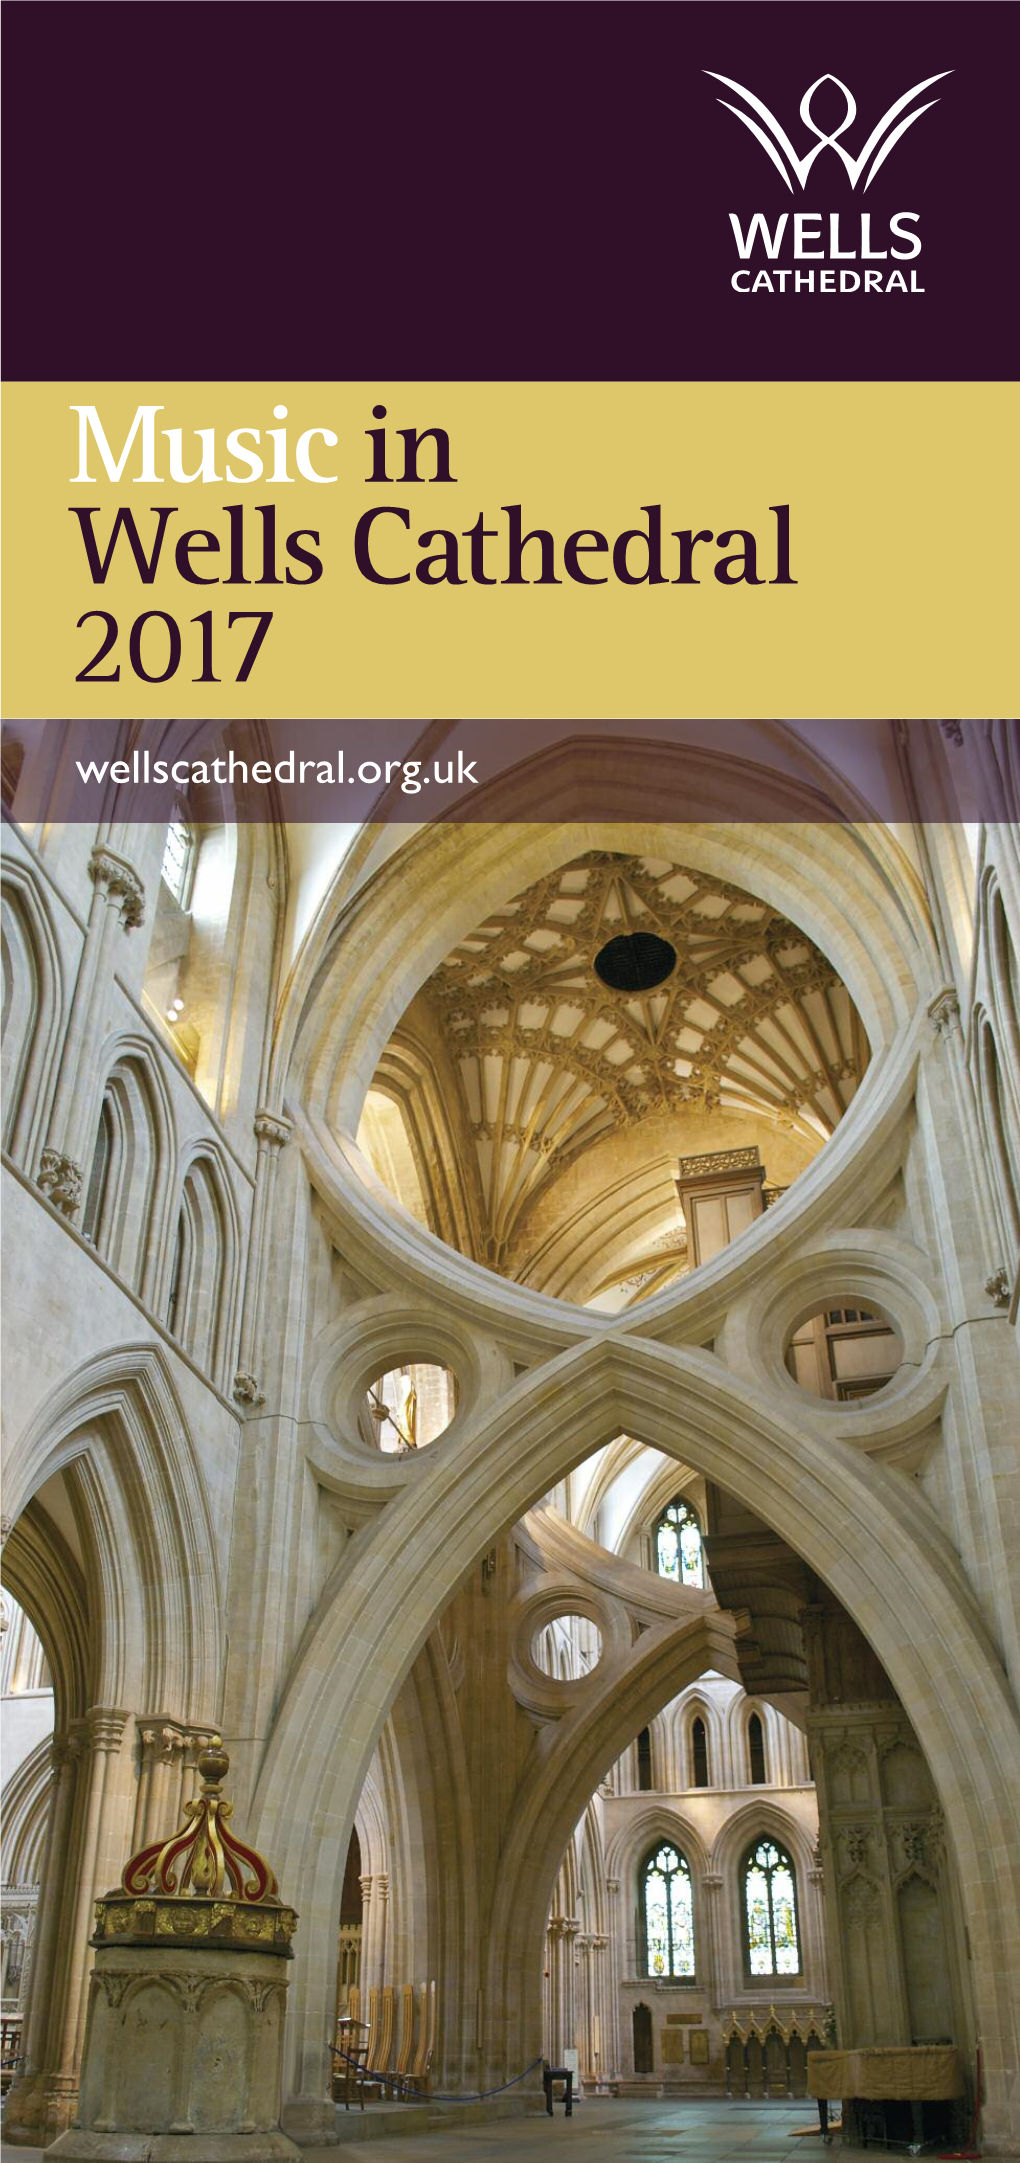 Music in Wells Cathedral 2017